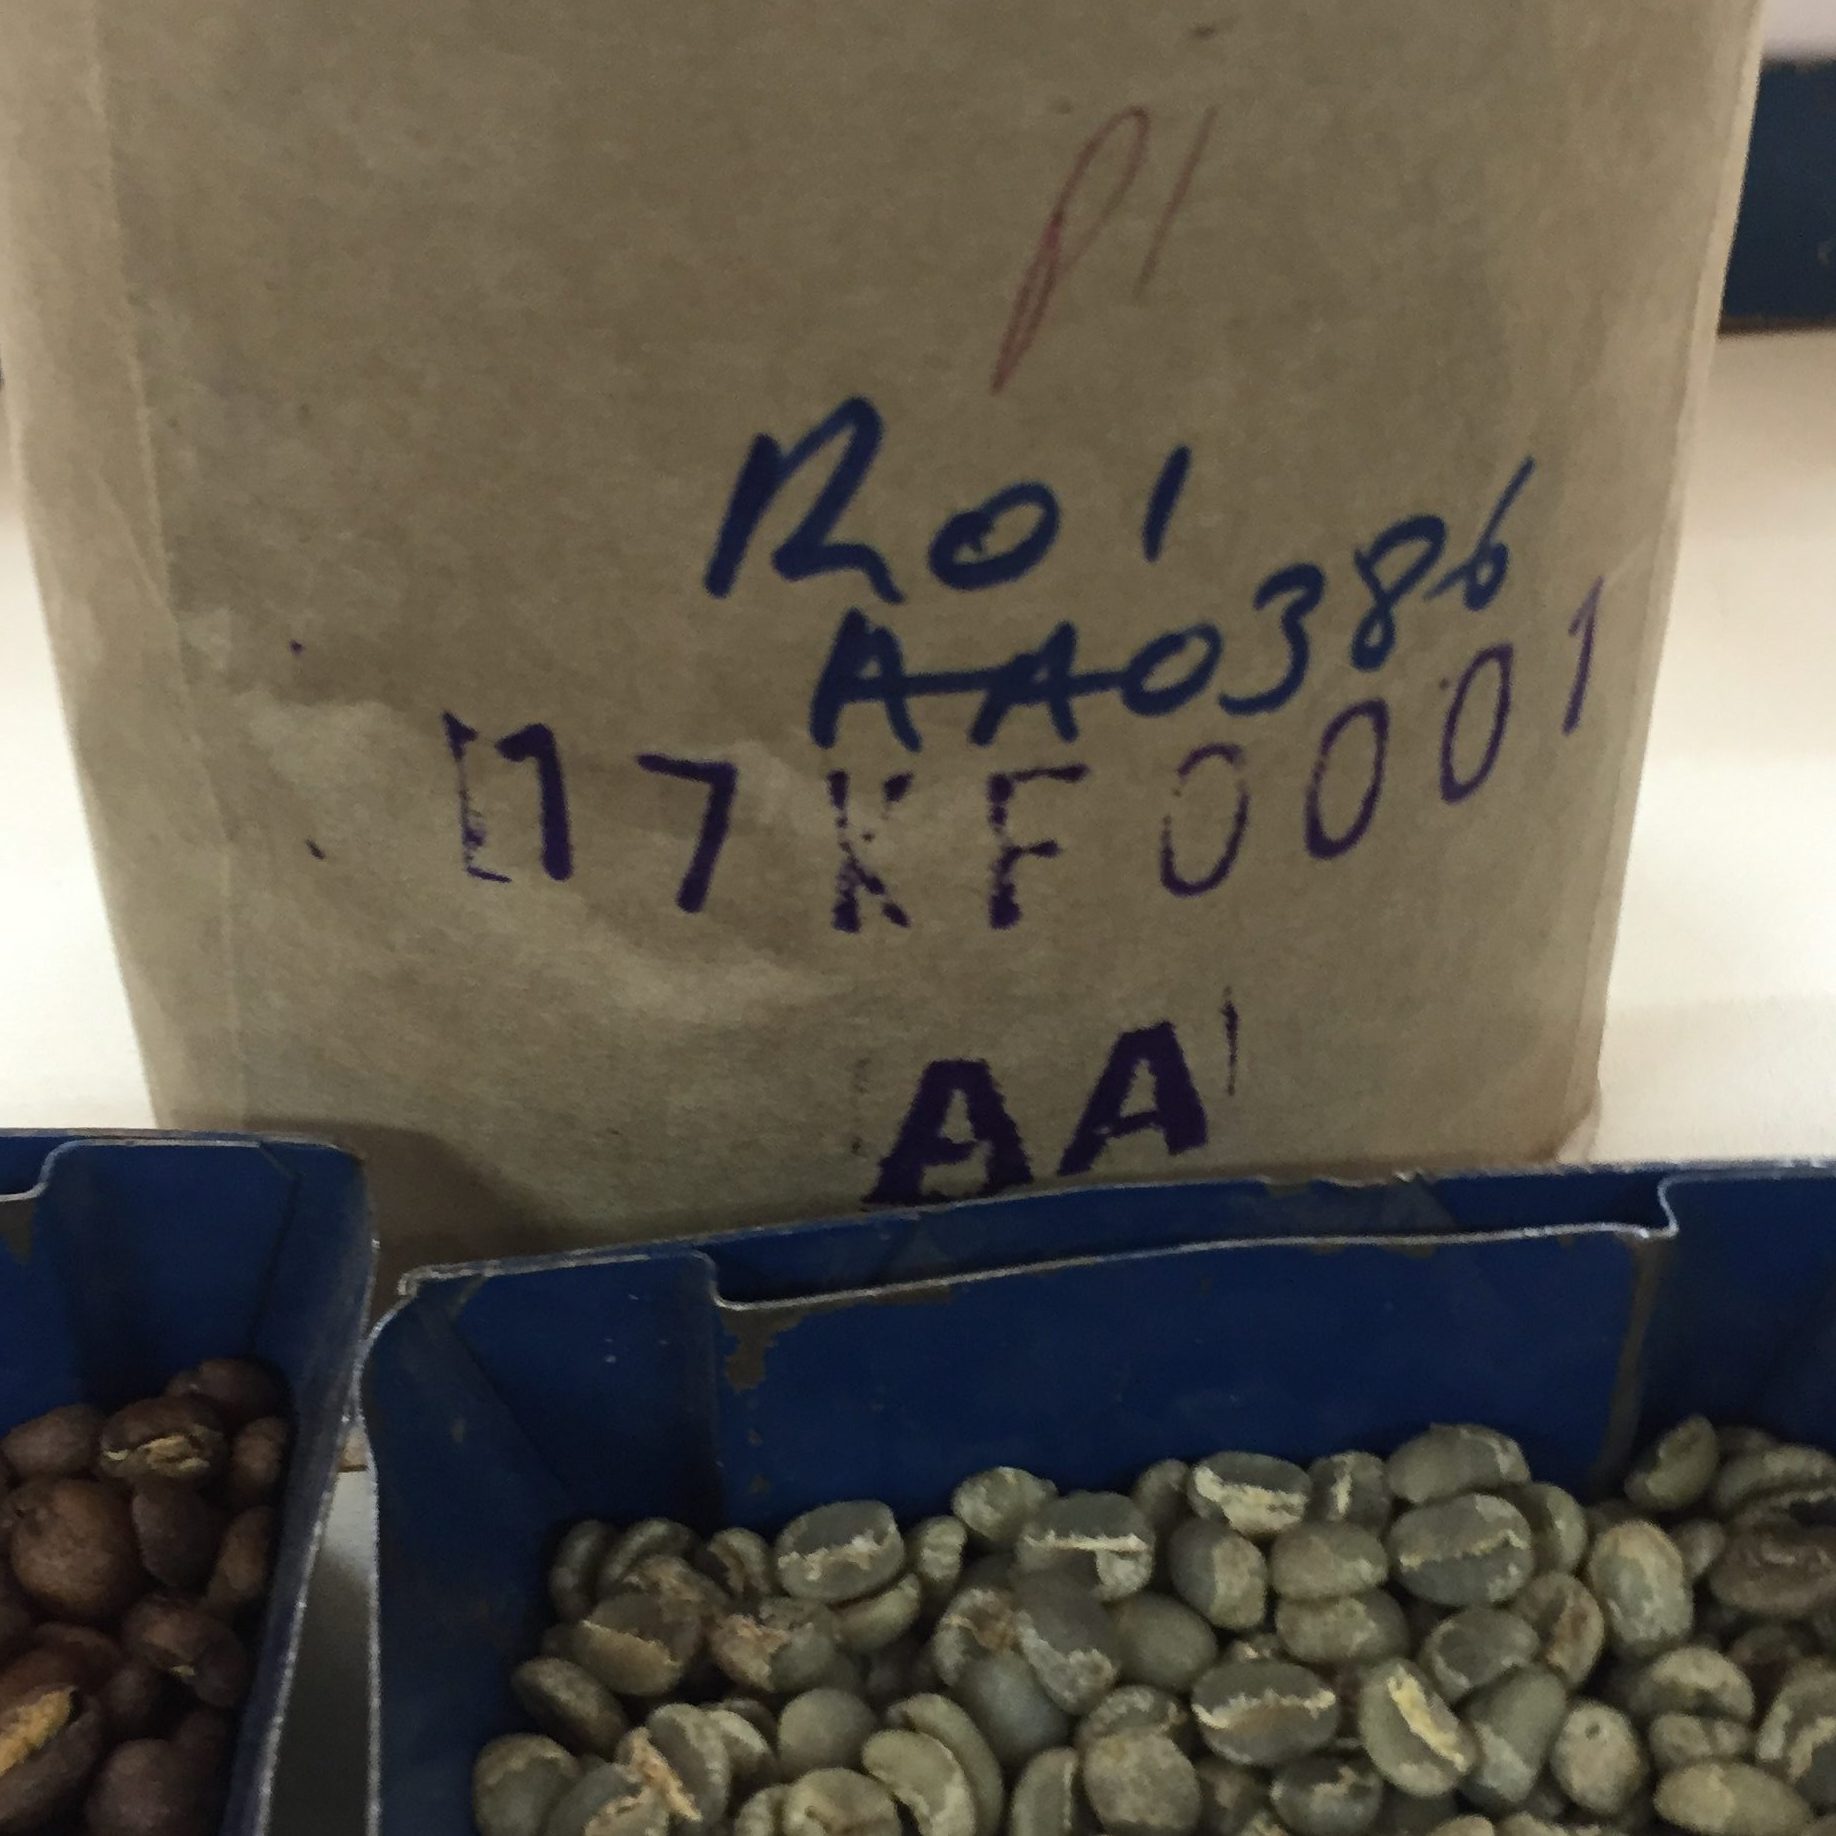 A sample of a coffee at an export cupping in Kenya. The outturn number—17KF0001—is stamped on the bag